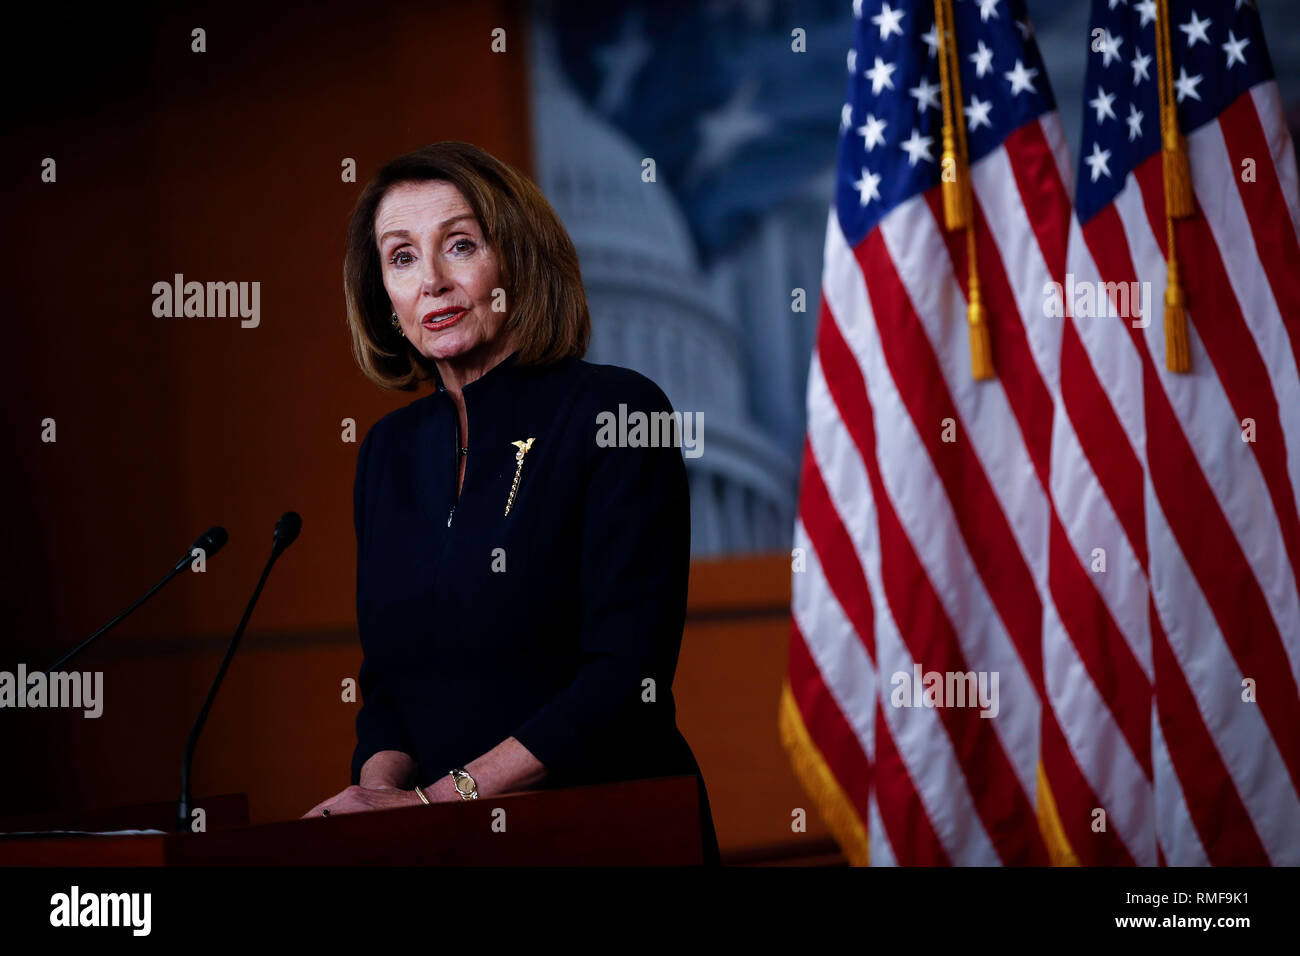 (190214) -- WASHINGTON, Feb. 14, 2019 (Xinhua) -- U.S. House Speaker Nancy Pelosi speaks during a press conference on Capitol Hill in Washington, DC, the United States, on Feb. 14, 2019. U.S. President Donald Trump is prepared to sign a bipartisan bill on spending and border security to avert another government shutdown, but also declare a national emergency to obtain funds for his long-promised border wall, the White House said Thursday. Nancy Pelosi, the top Democrat in the House, said her party is 'reviewing our options' in responding to the anticipated emergency declaration. (Xinhua/Ting Stock Photo